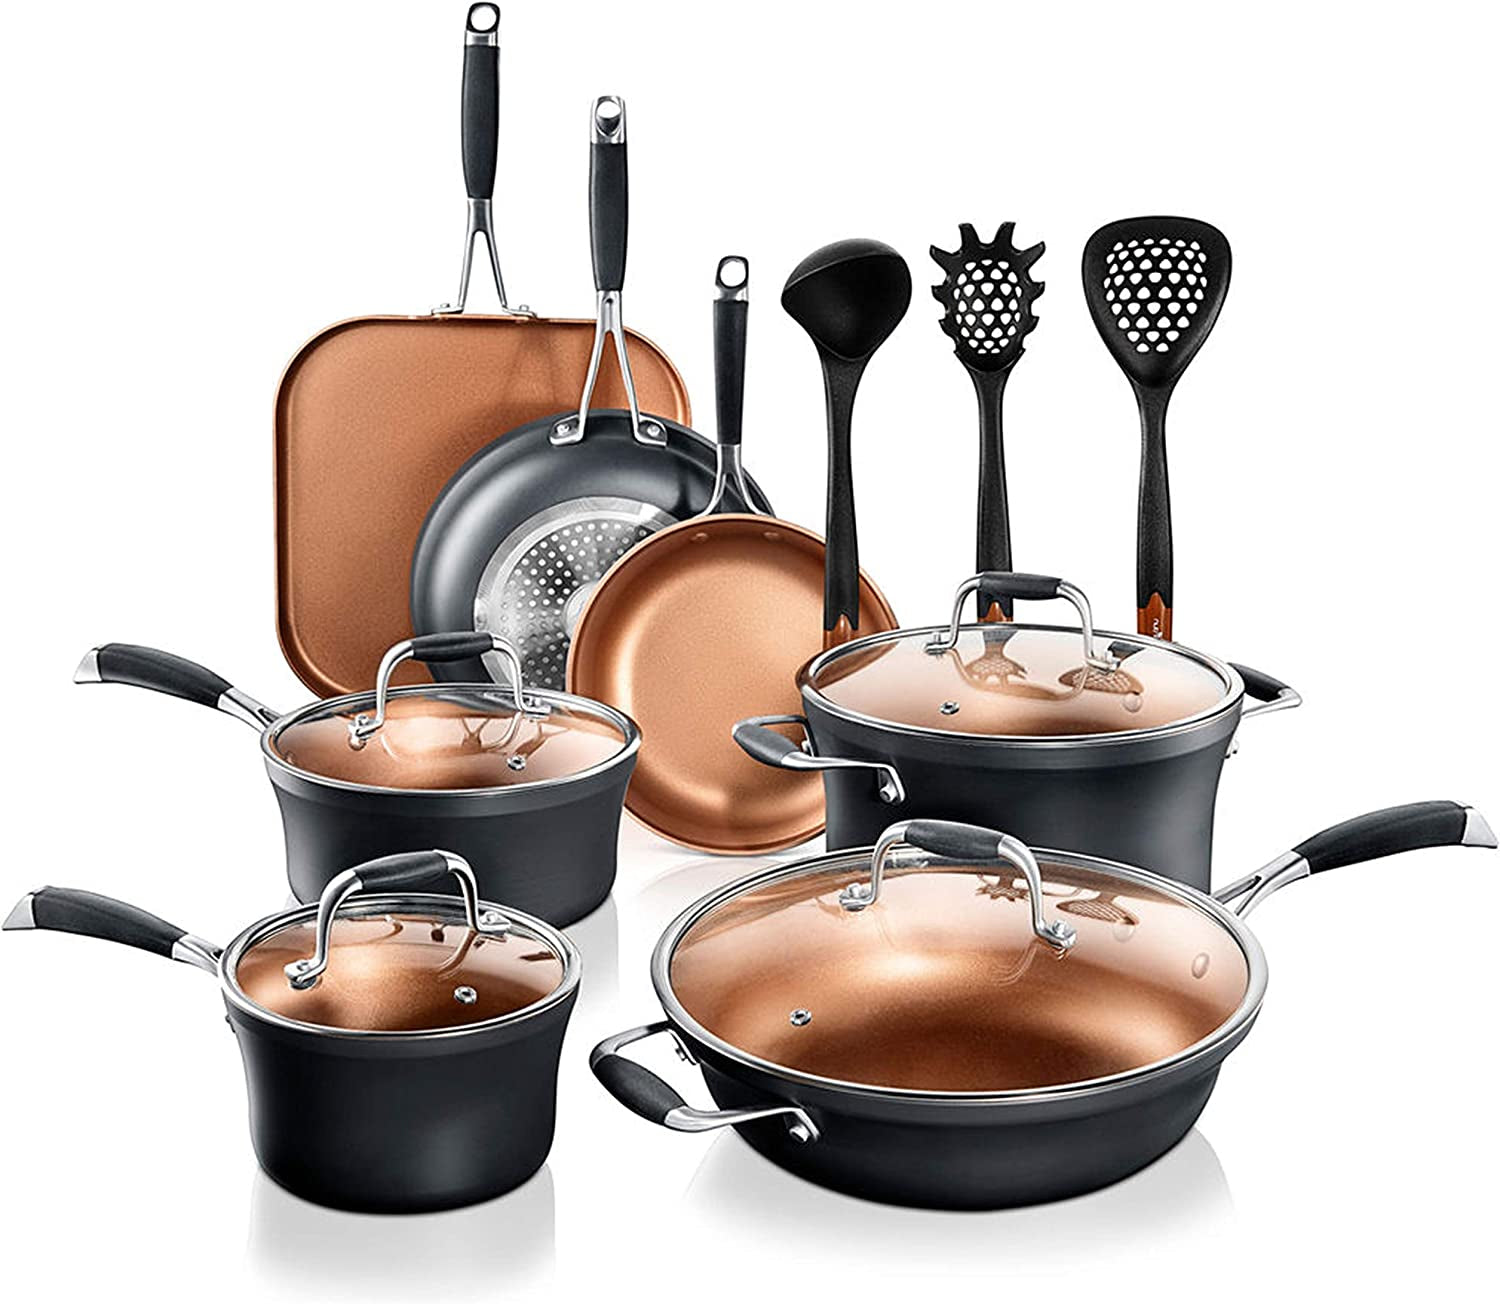 Stackable Pots and Pans Set – 14-Pcs Luxurious Stackable Cookware Set – Sauce Pans Nonstick Set with Lids– Healthy Food-Grade Copper Non-Stick Ceramic Coating - PTFE, PFOA, and PFOS Free